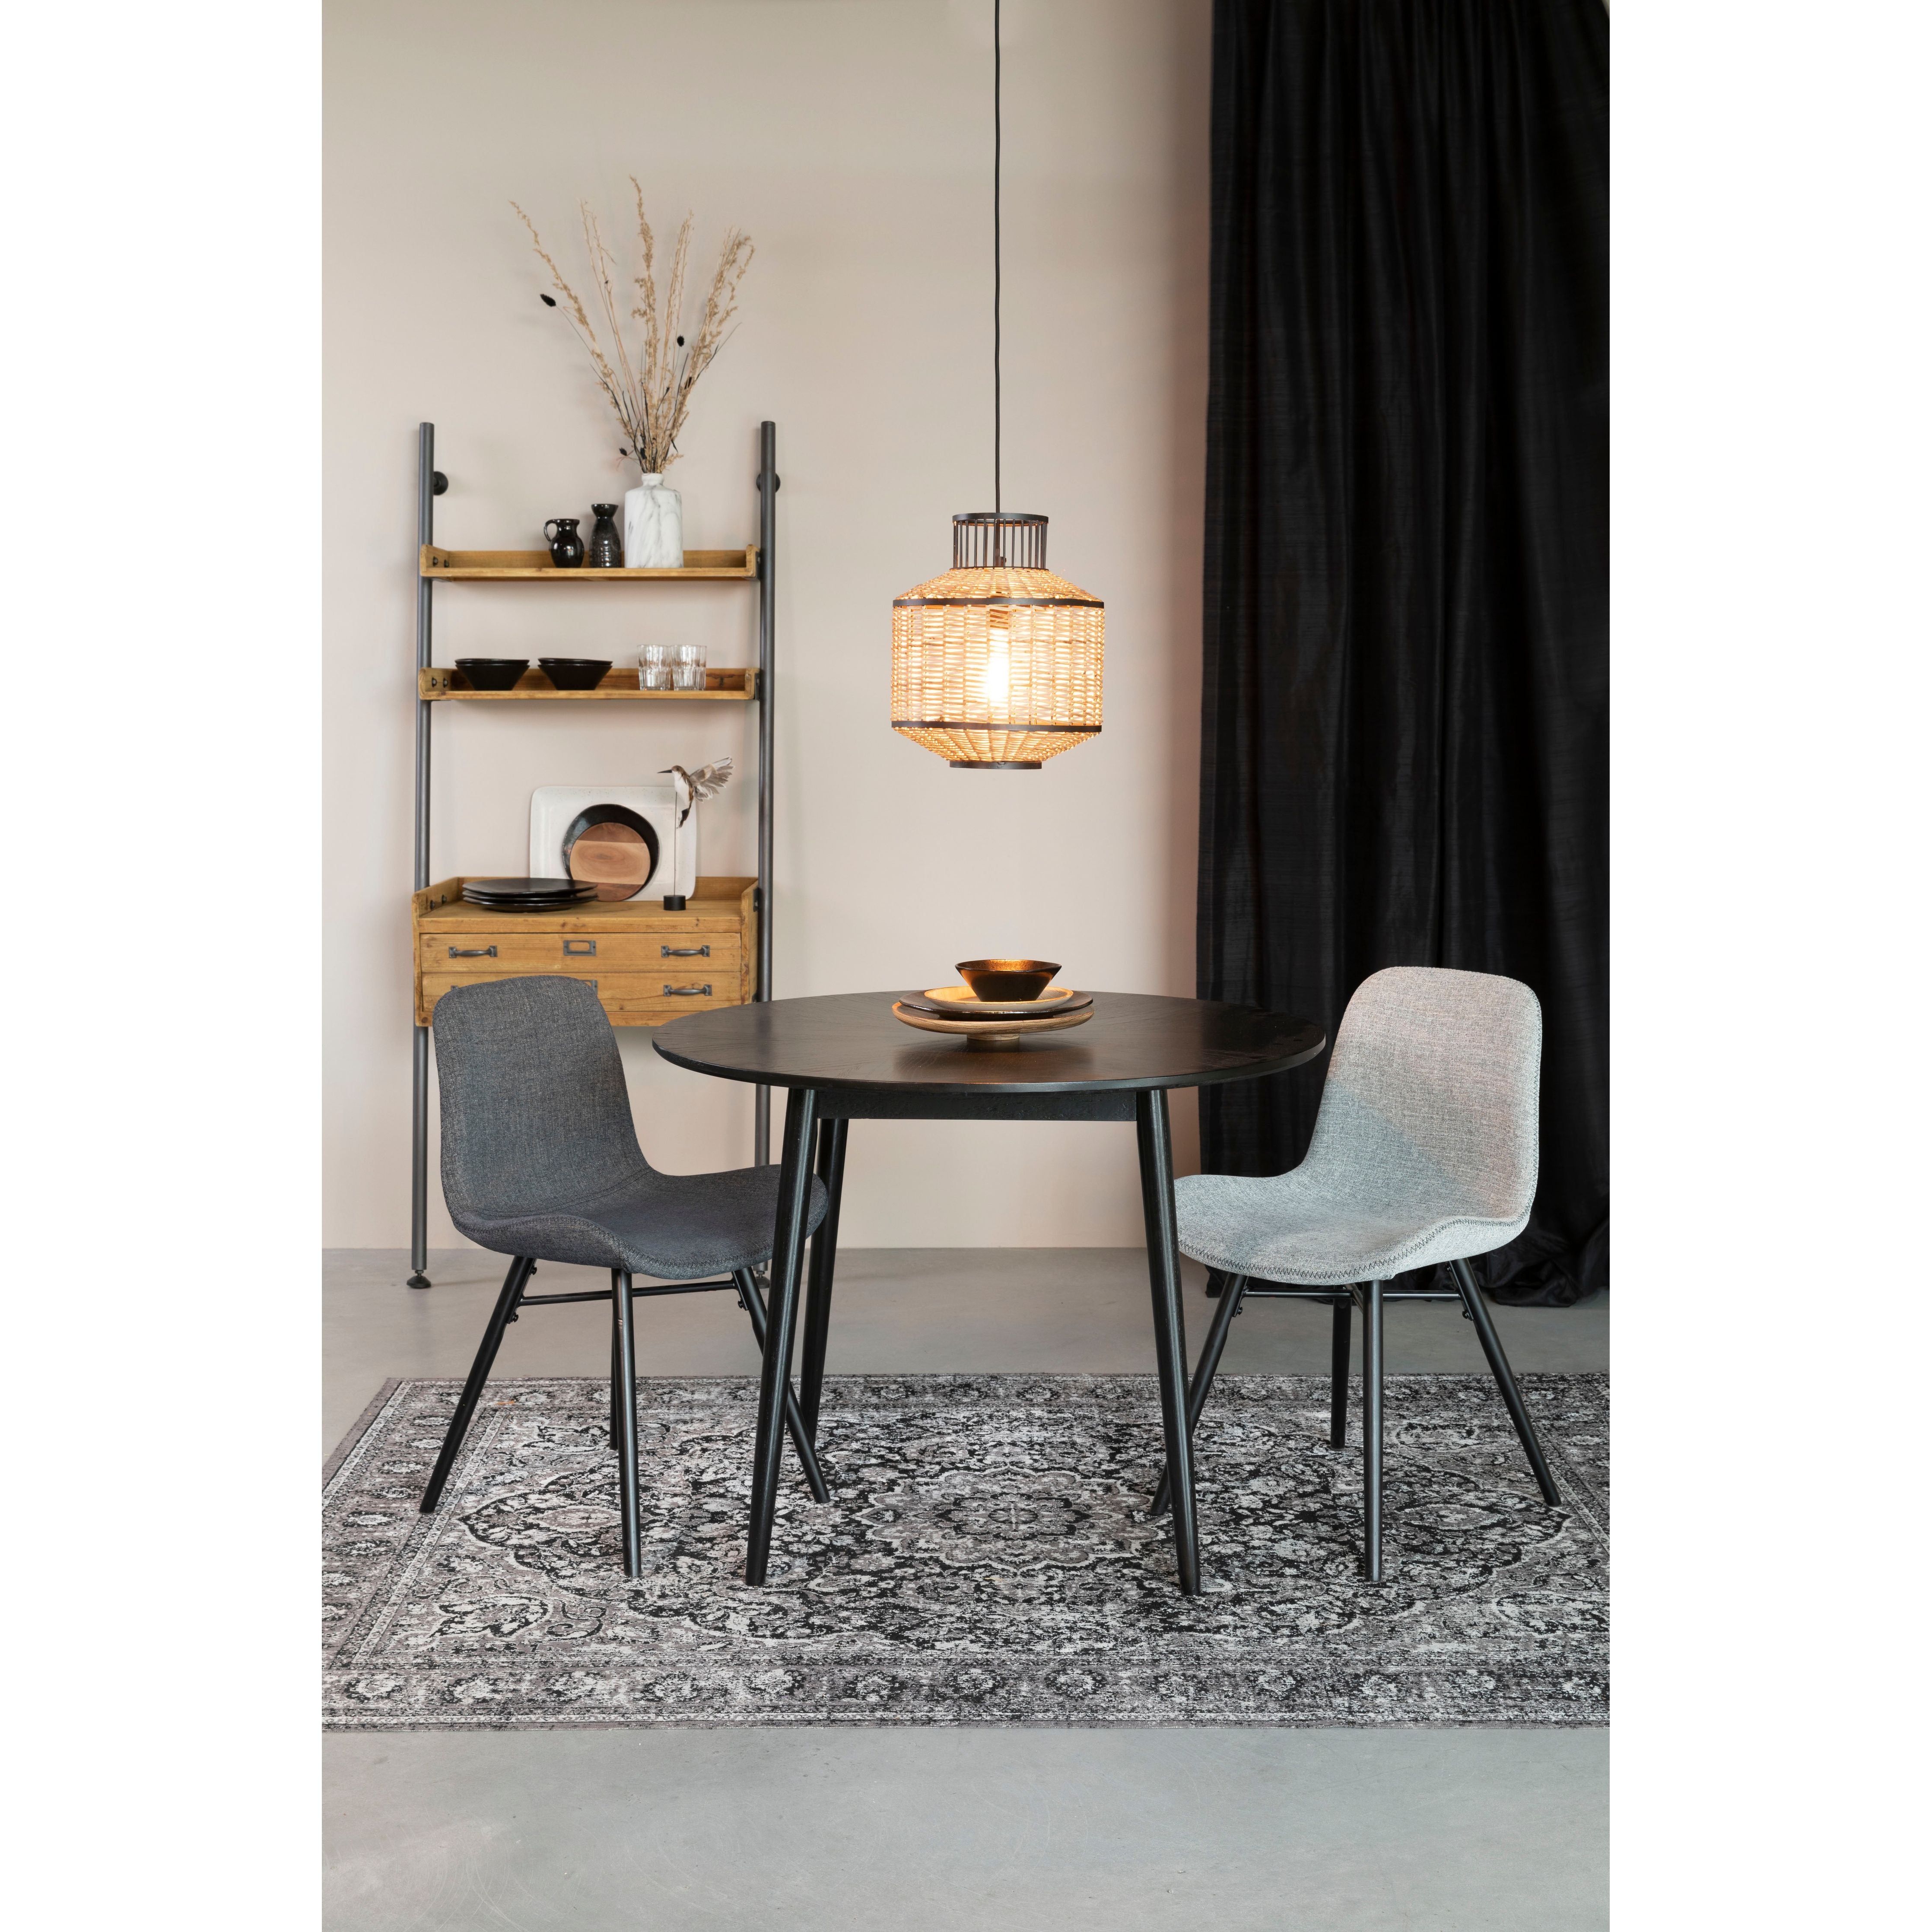 Chair lester light gray | 2 pieces